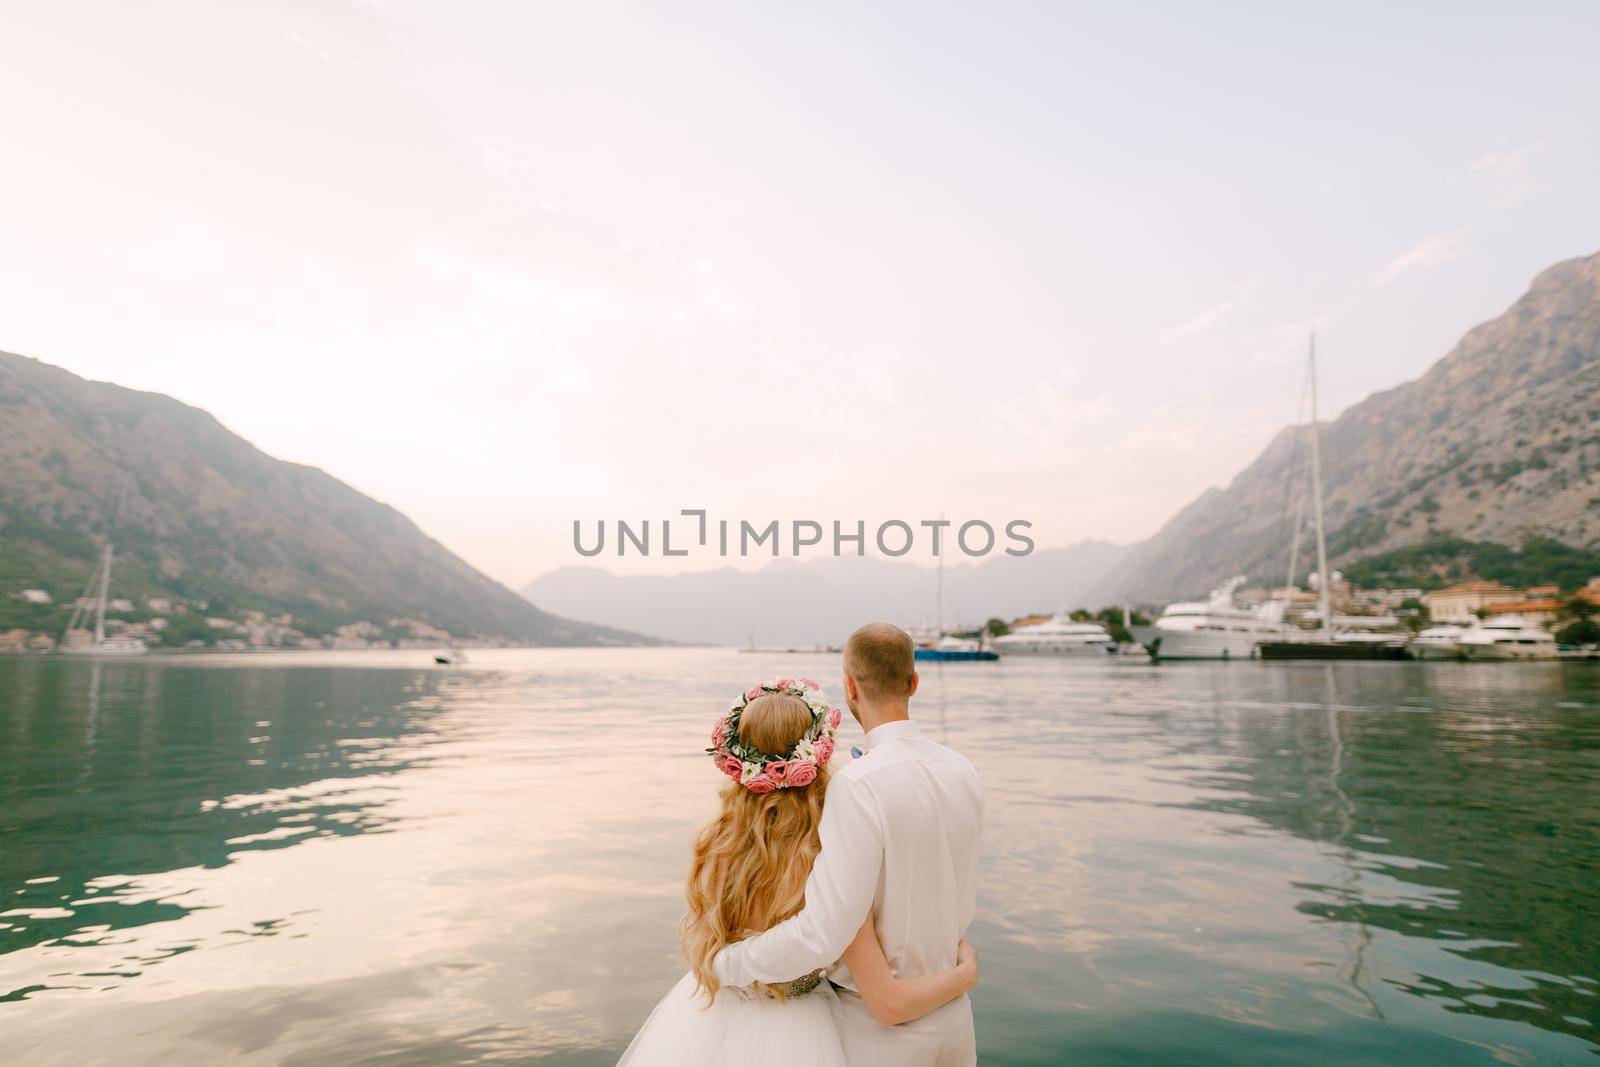 The bride in a wreath and groom hug on the pier near the old town of Kotor in the Bay of Kotor, close-up by Nadtochiy